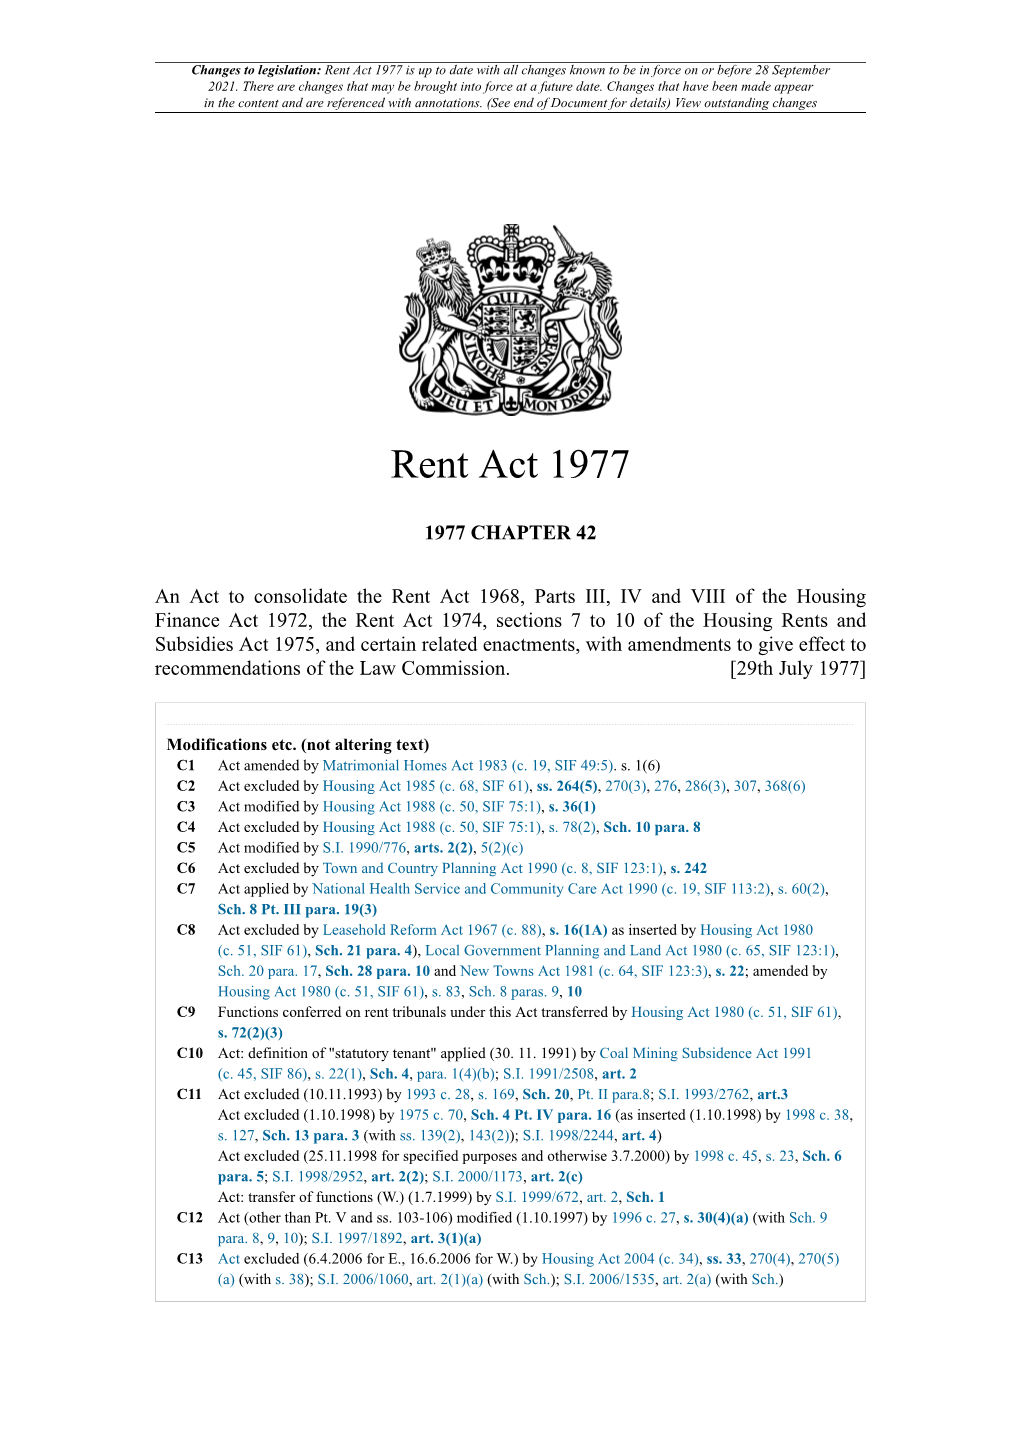 Rent Act 1977 Is up to Date with All Changes Known to Be in Force on Or Before 28 September 2021